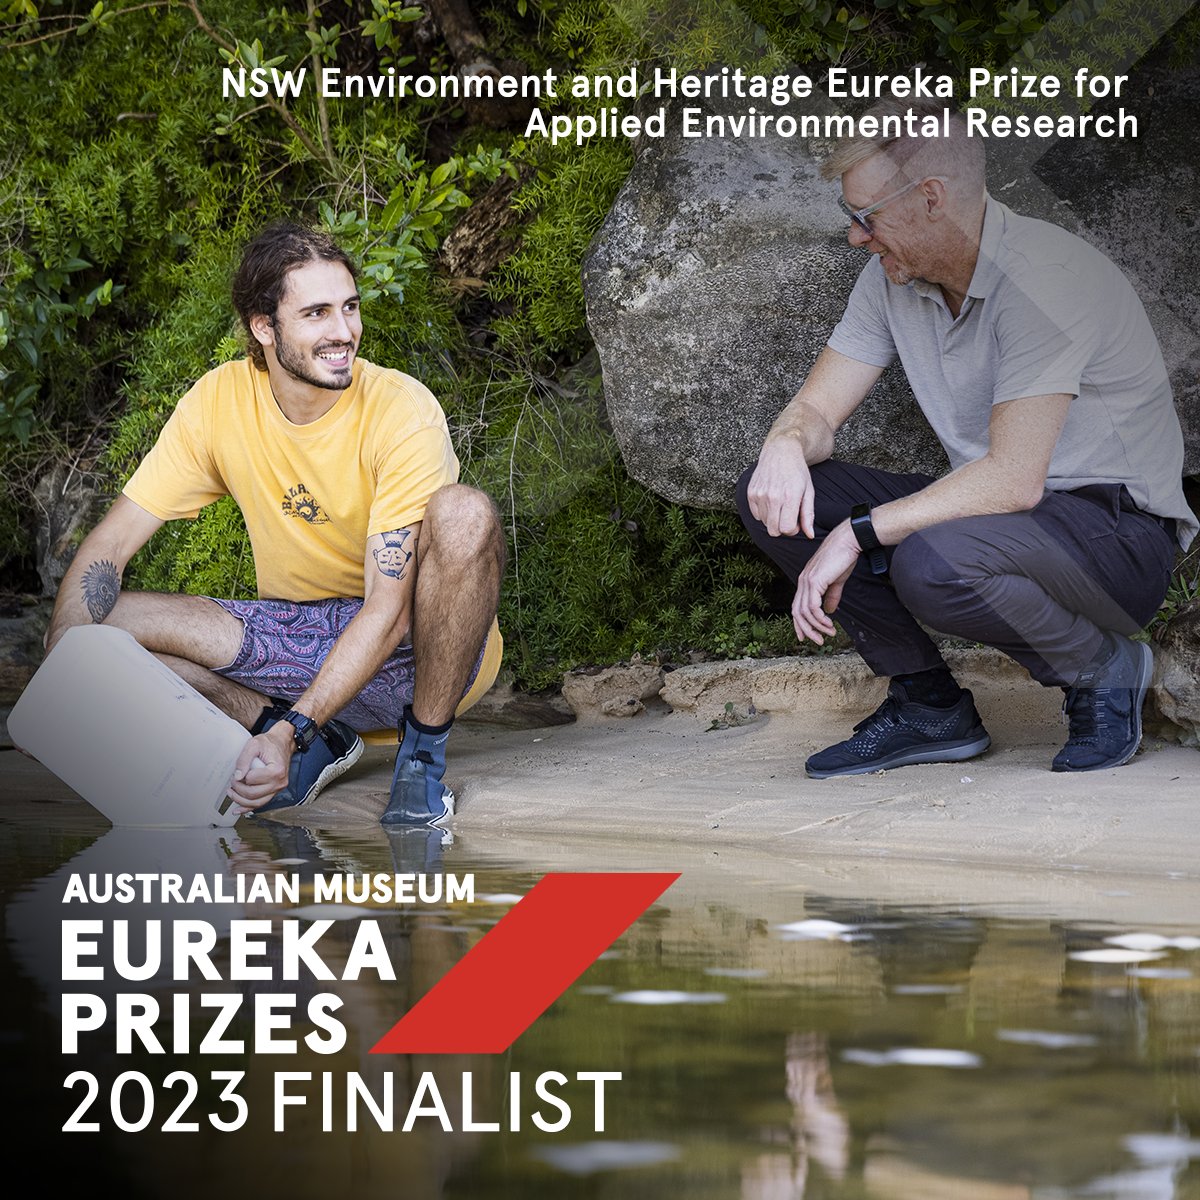 Protecting Water Quality at Australian Beaches @UTS_Science @NSWDPE and @CCoastCouncil is a finalist in the @nswenviromedia Eureka Prize for Applied Environmental Research. Learn more: youtu.be/QIp7MTnqr8Q #EurekaPrizes